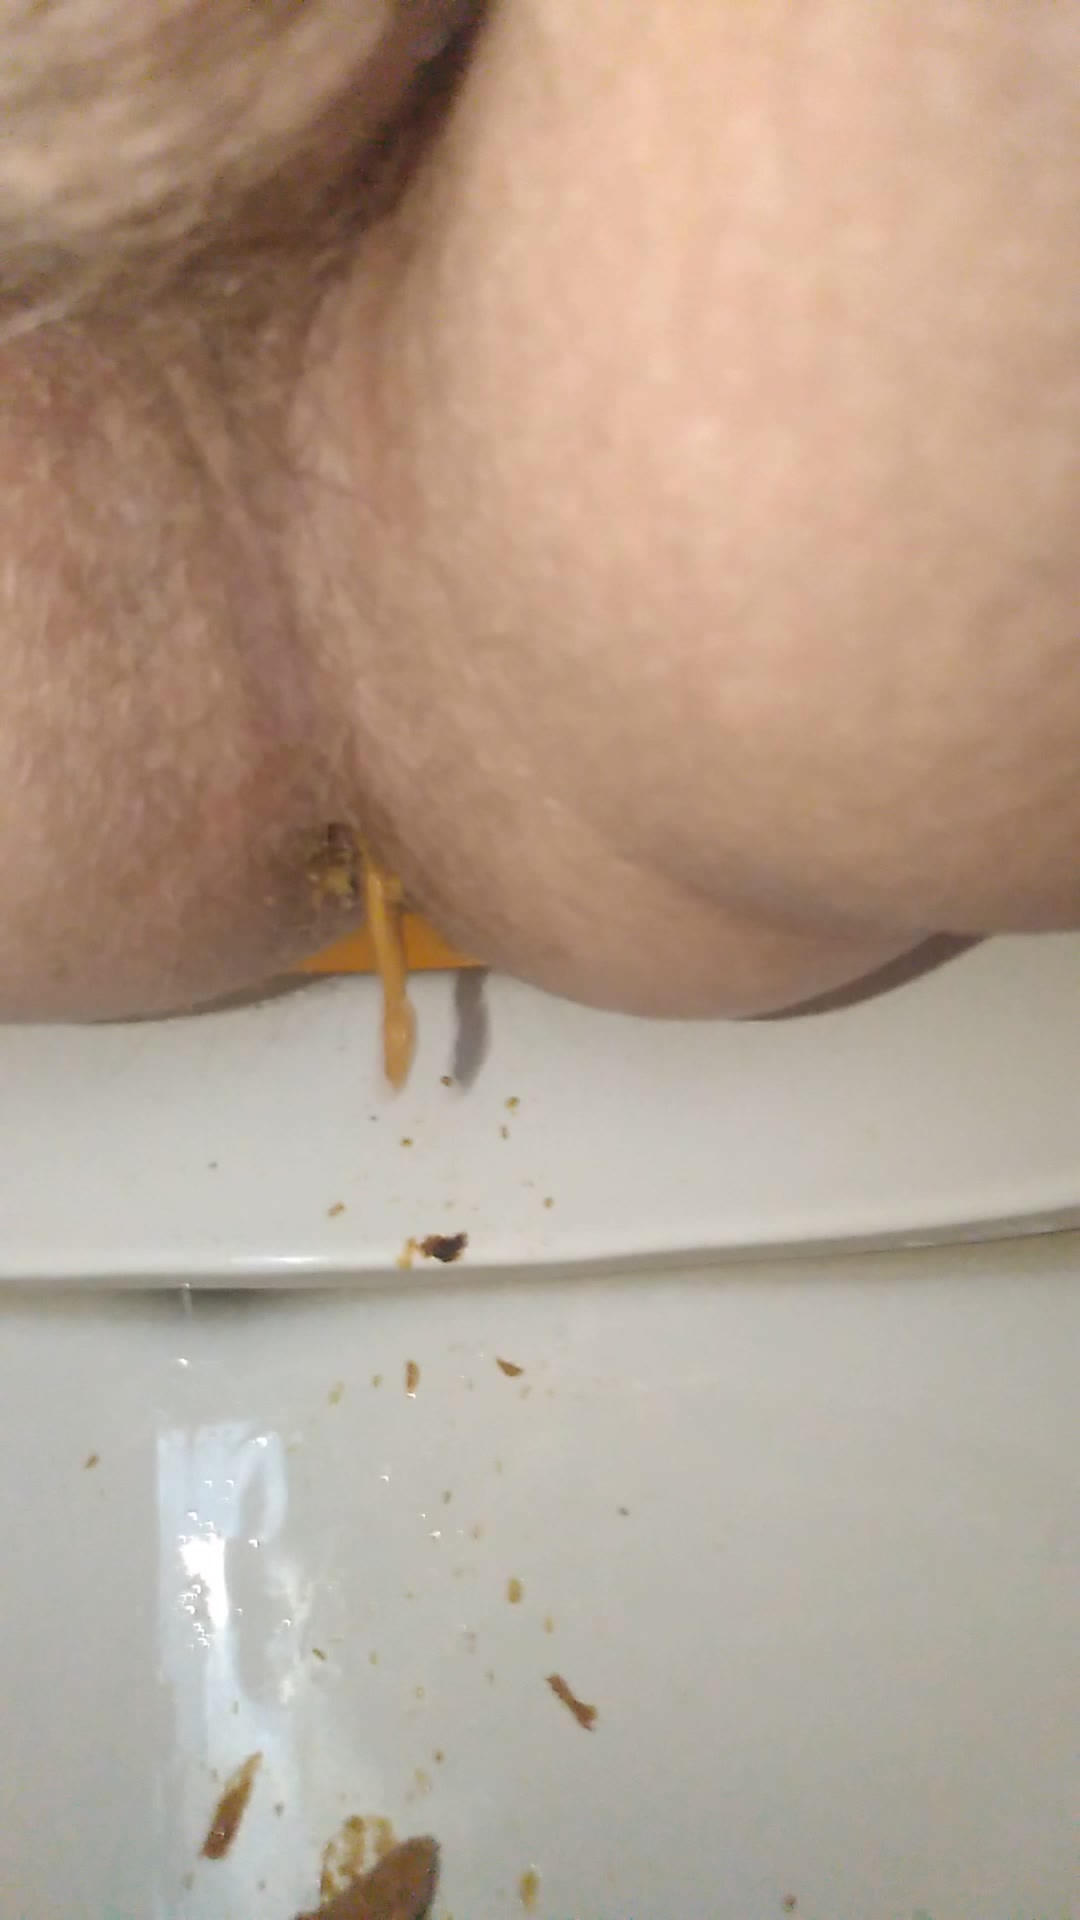 First bit of a bad shit on my friends toilet